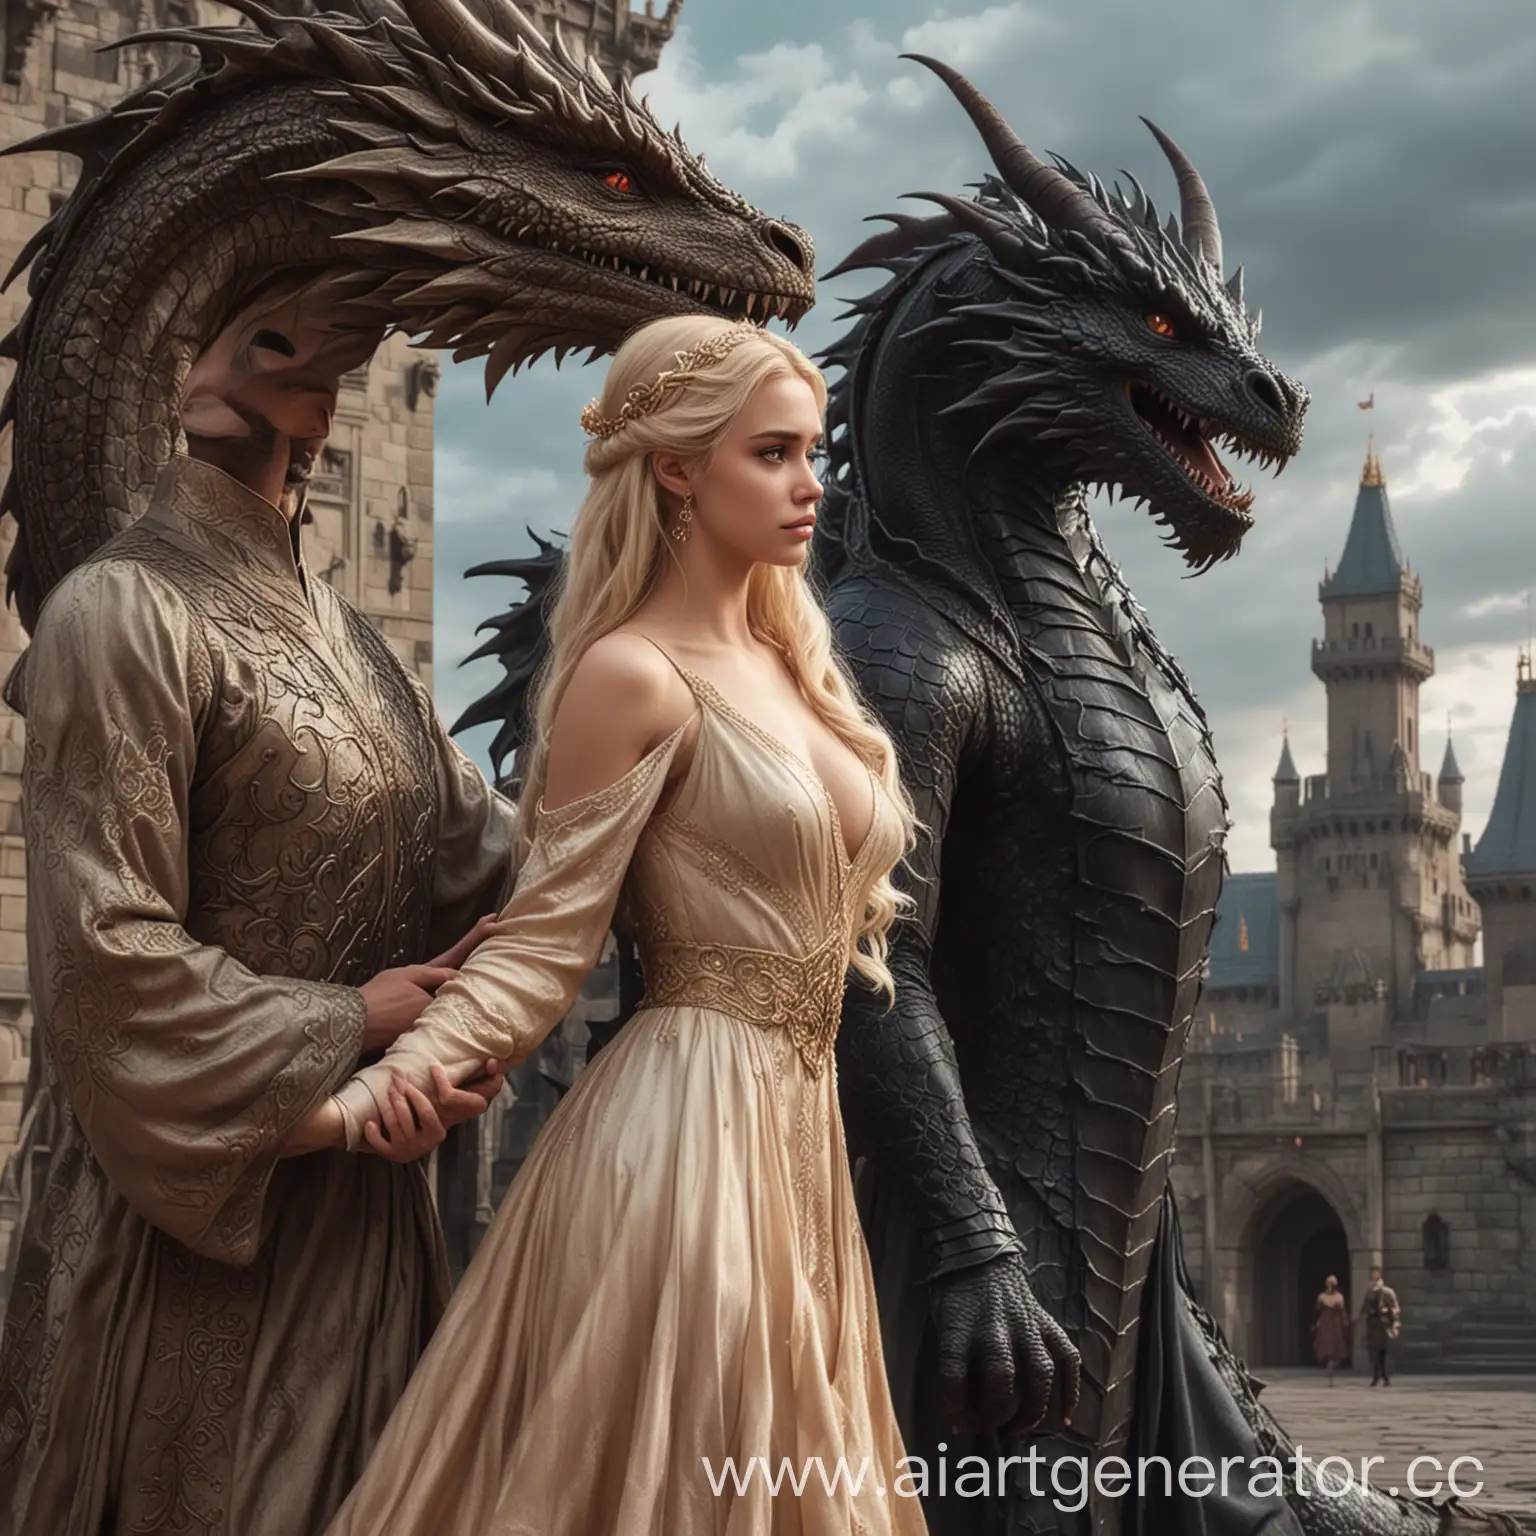 A beautiful blonde princess in a long dress is hugged by a brutal dark-haired man, with a dragon palace in the background